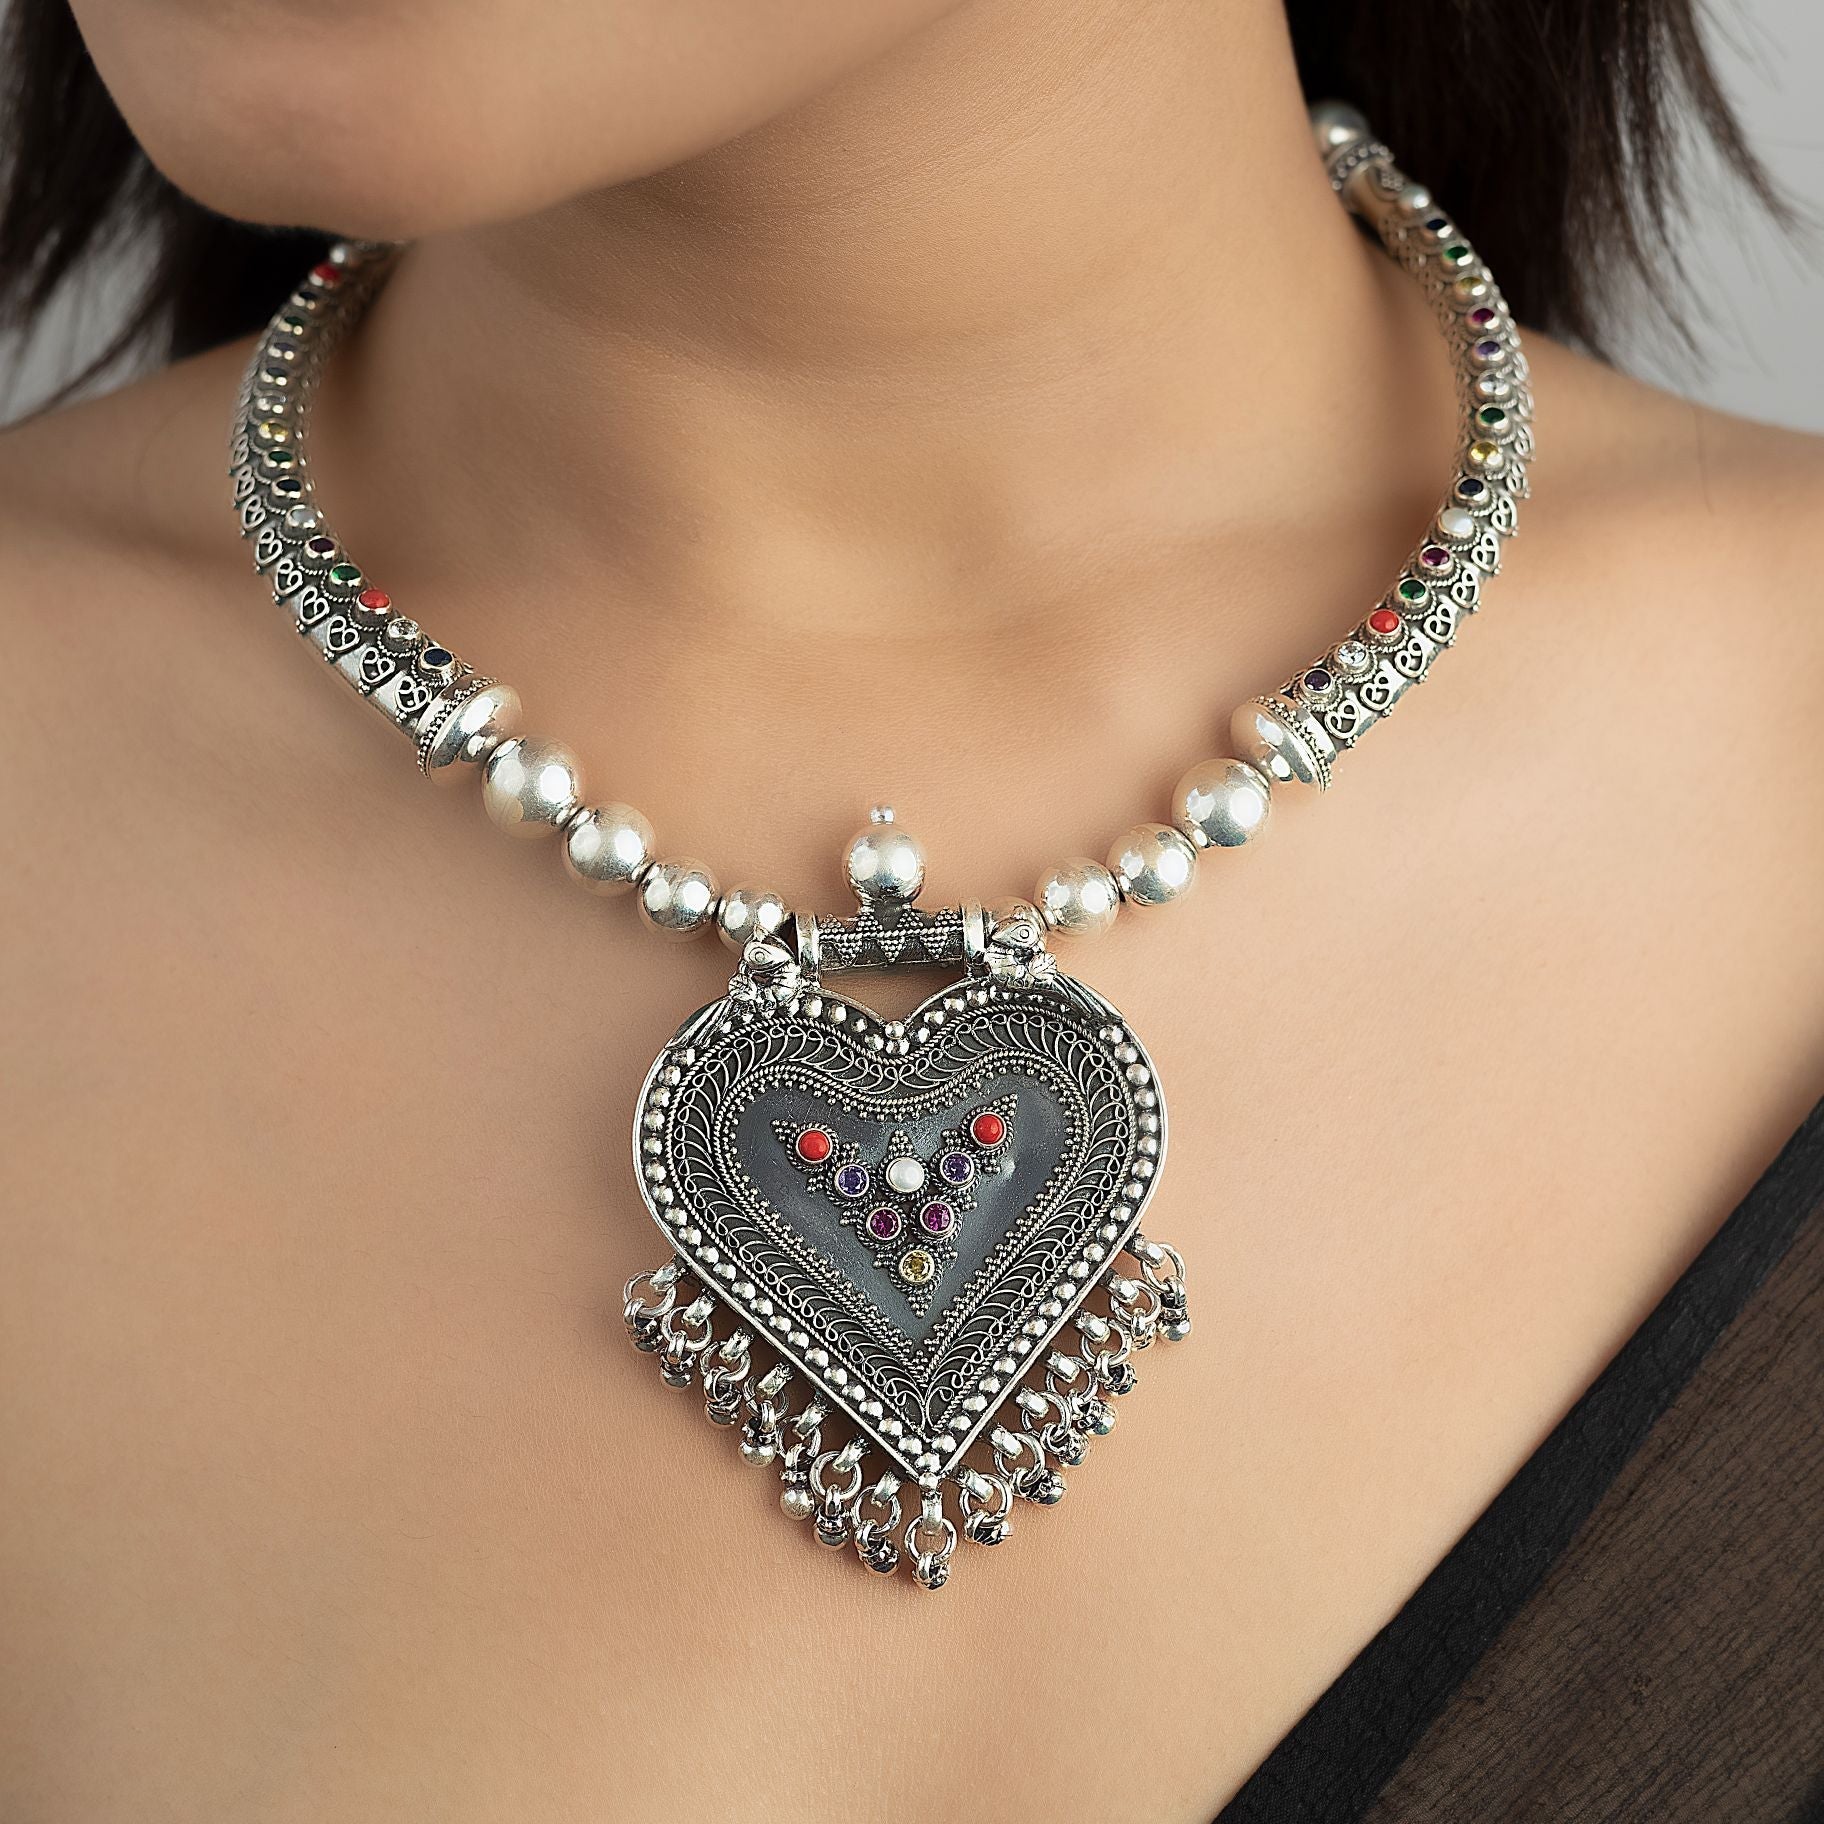 Exquisite Hasli Patterned with Heart Shaped Pendant Necklace silverhousebyrj